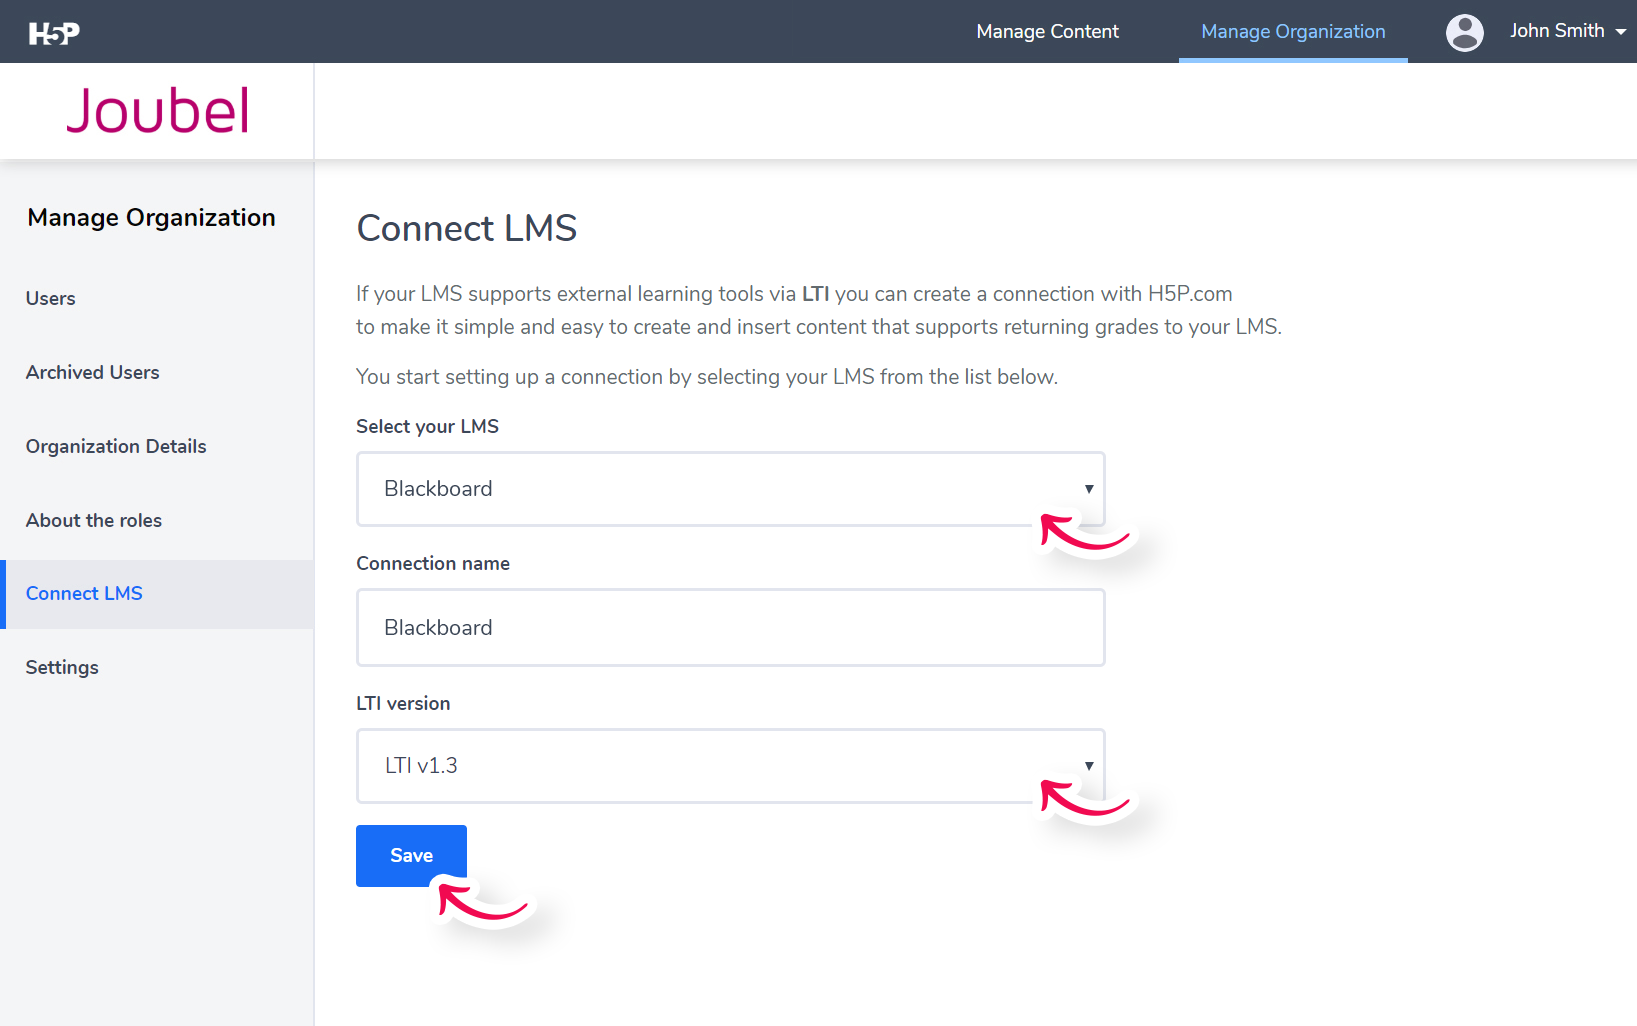 Select and save which LMS will be using